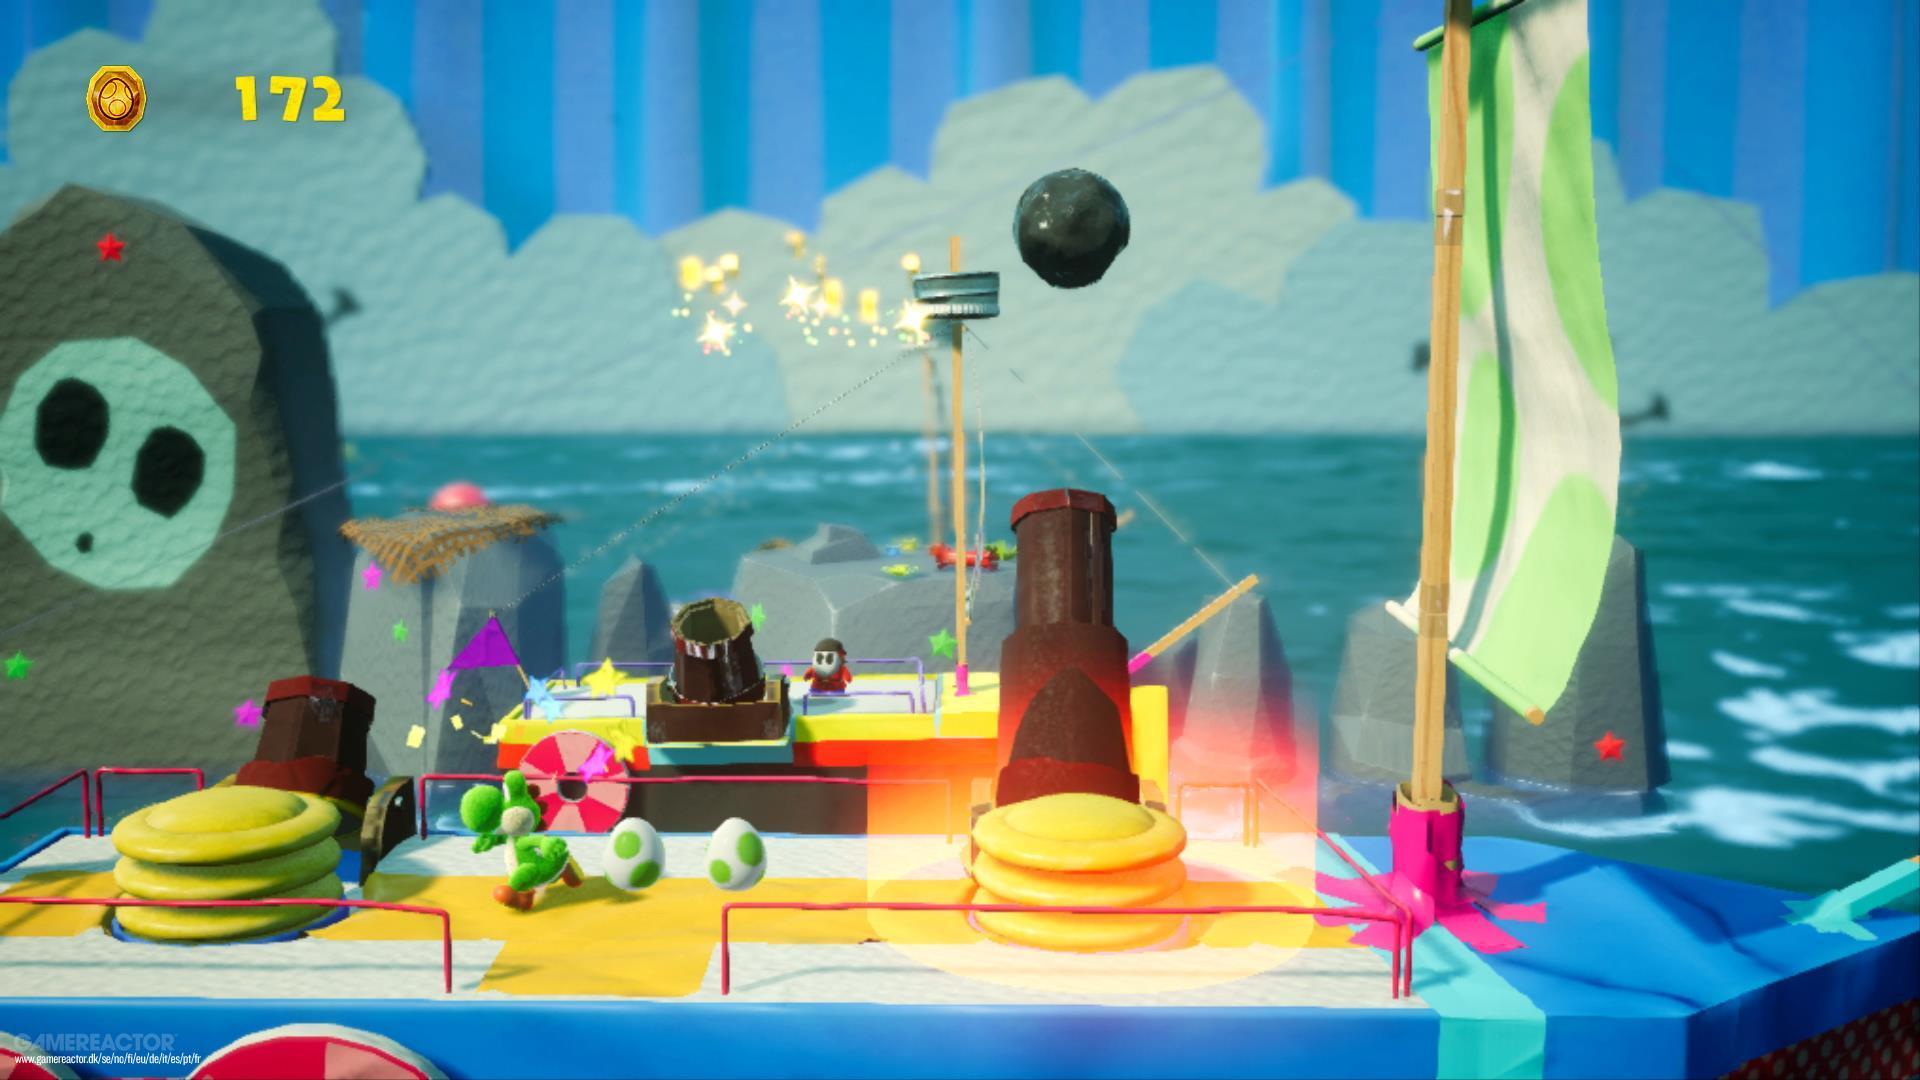 Picture Of 30 Minutes Of Gameplay From Yoshi's Crafted World 11 12